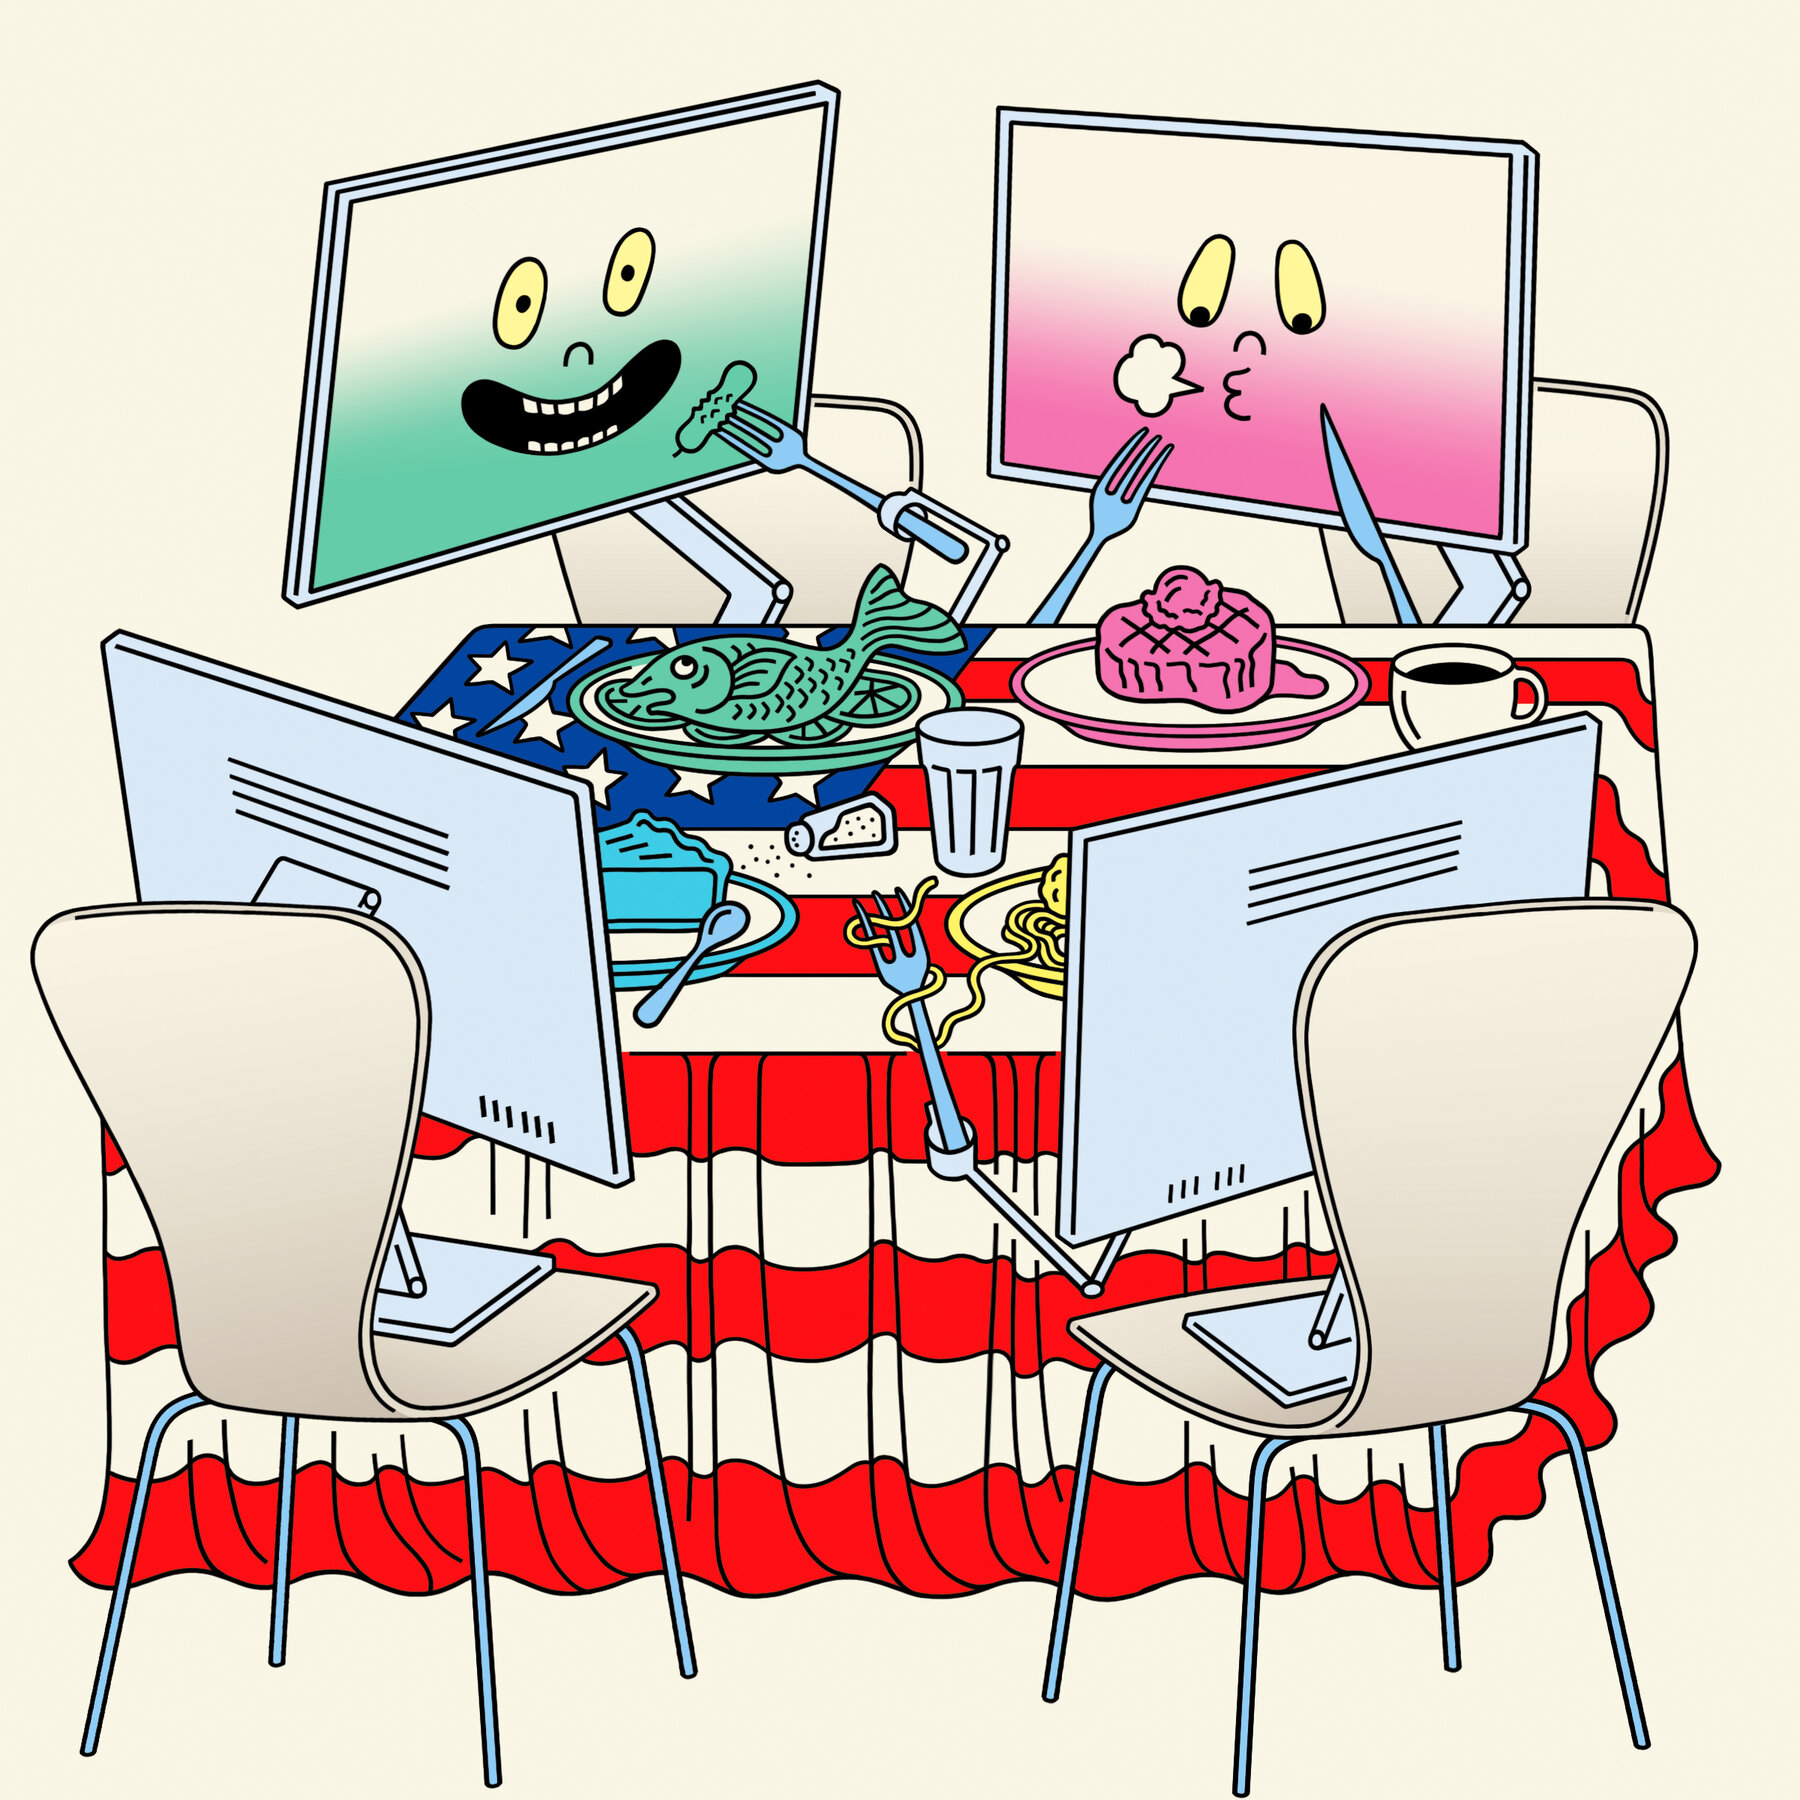 Cartoon of computer screens eating different colored foods.